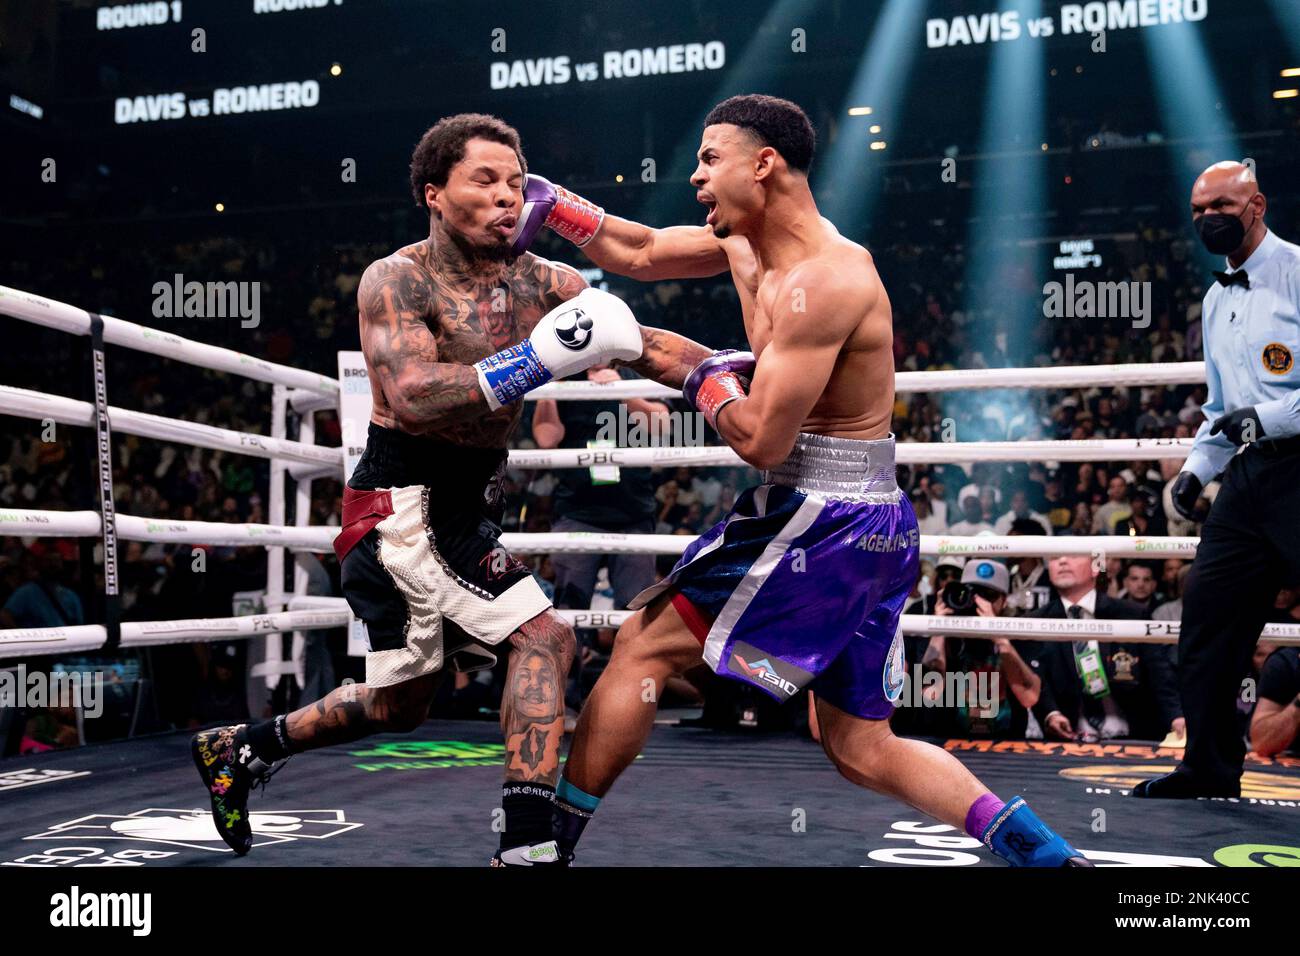 May 29, 2022, Brooklyn, New York, USA GERVONTA DAVIS (black and white trunks) battles ROLANDO ROMERO in a WBA Lightweight Championship bout at the Barclays Center in Brooklyn, New York